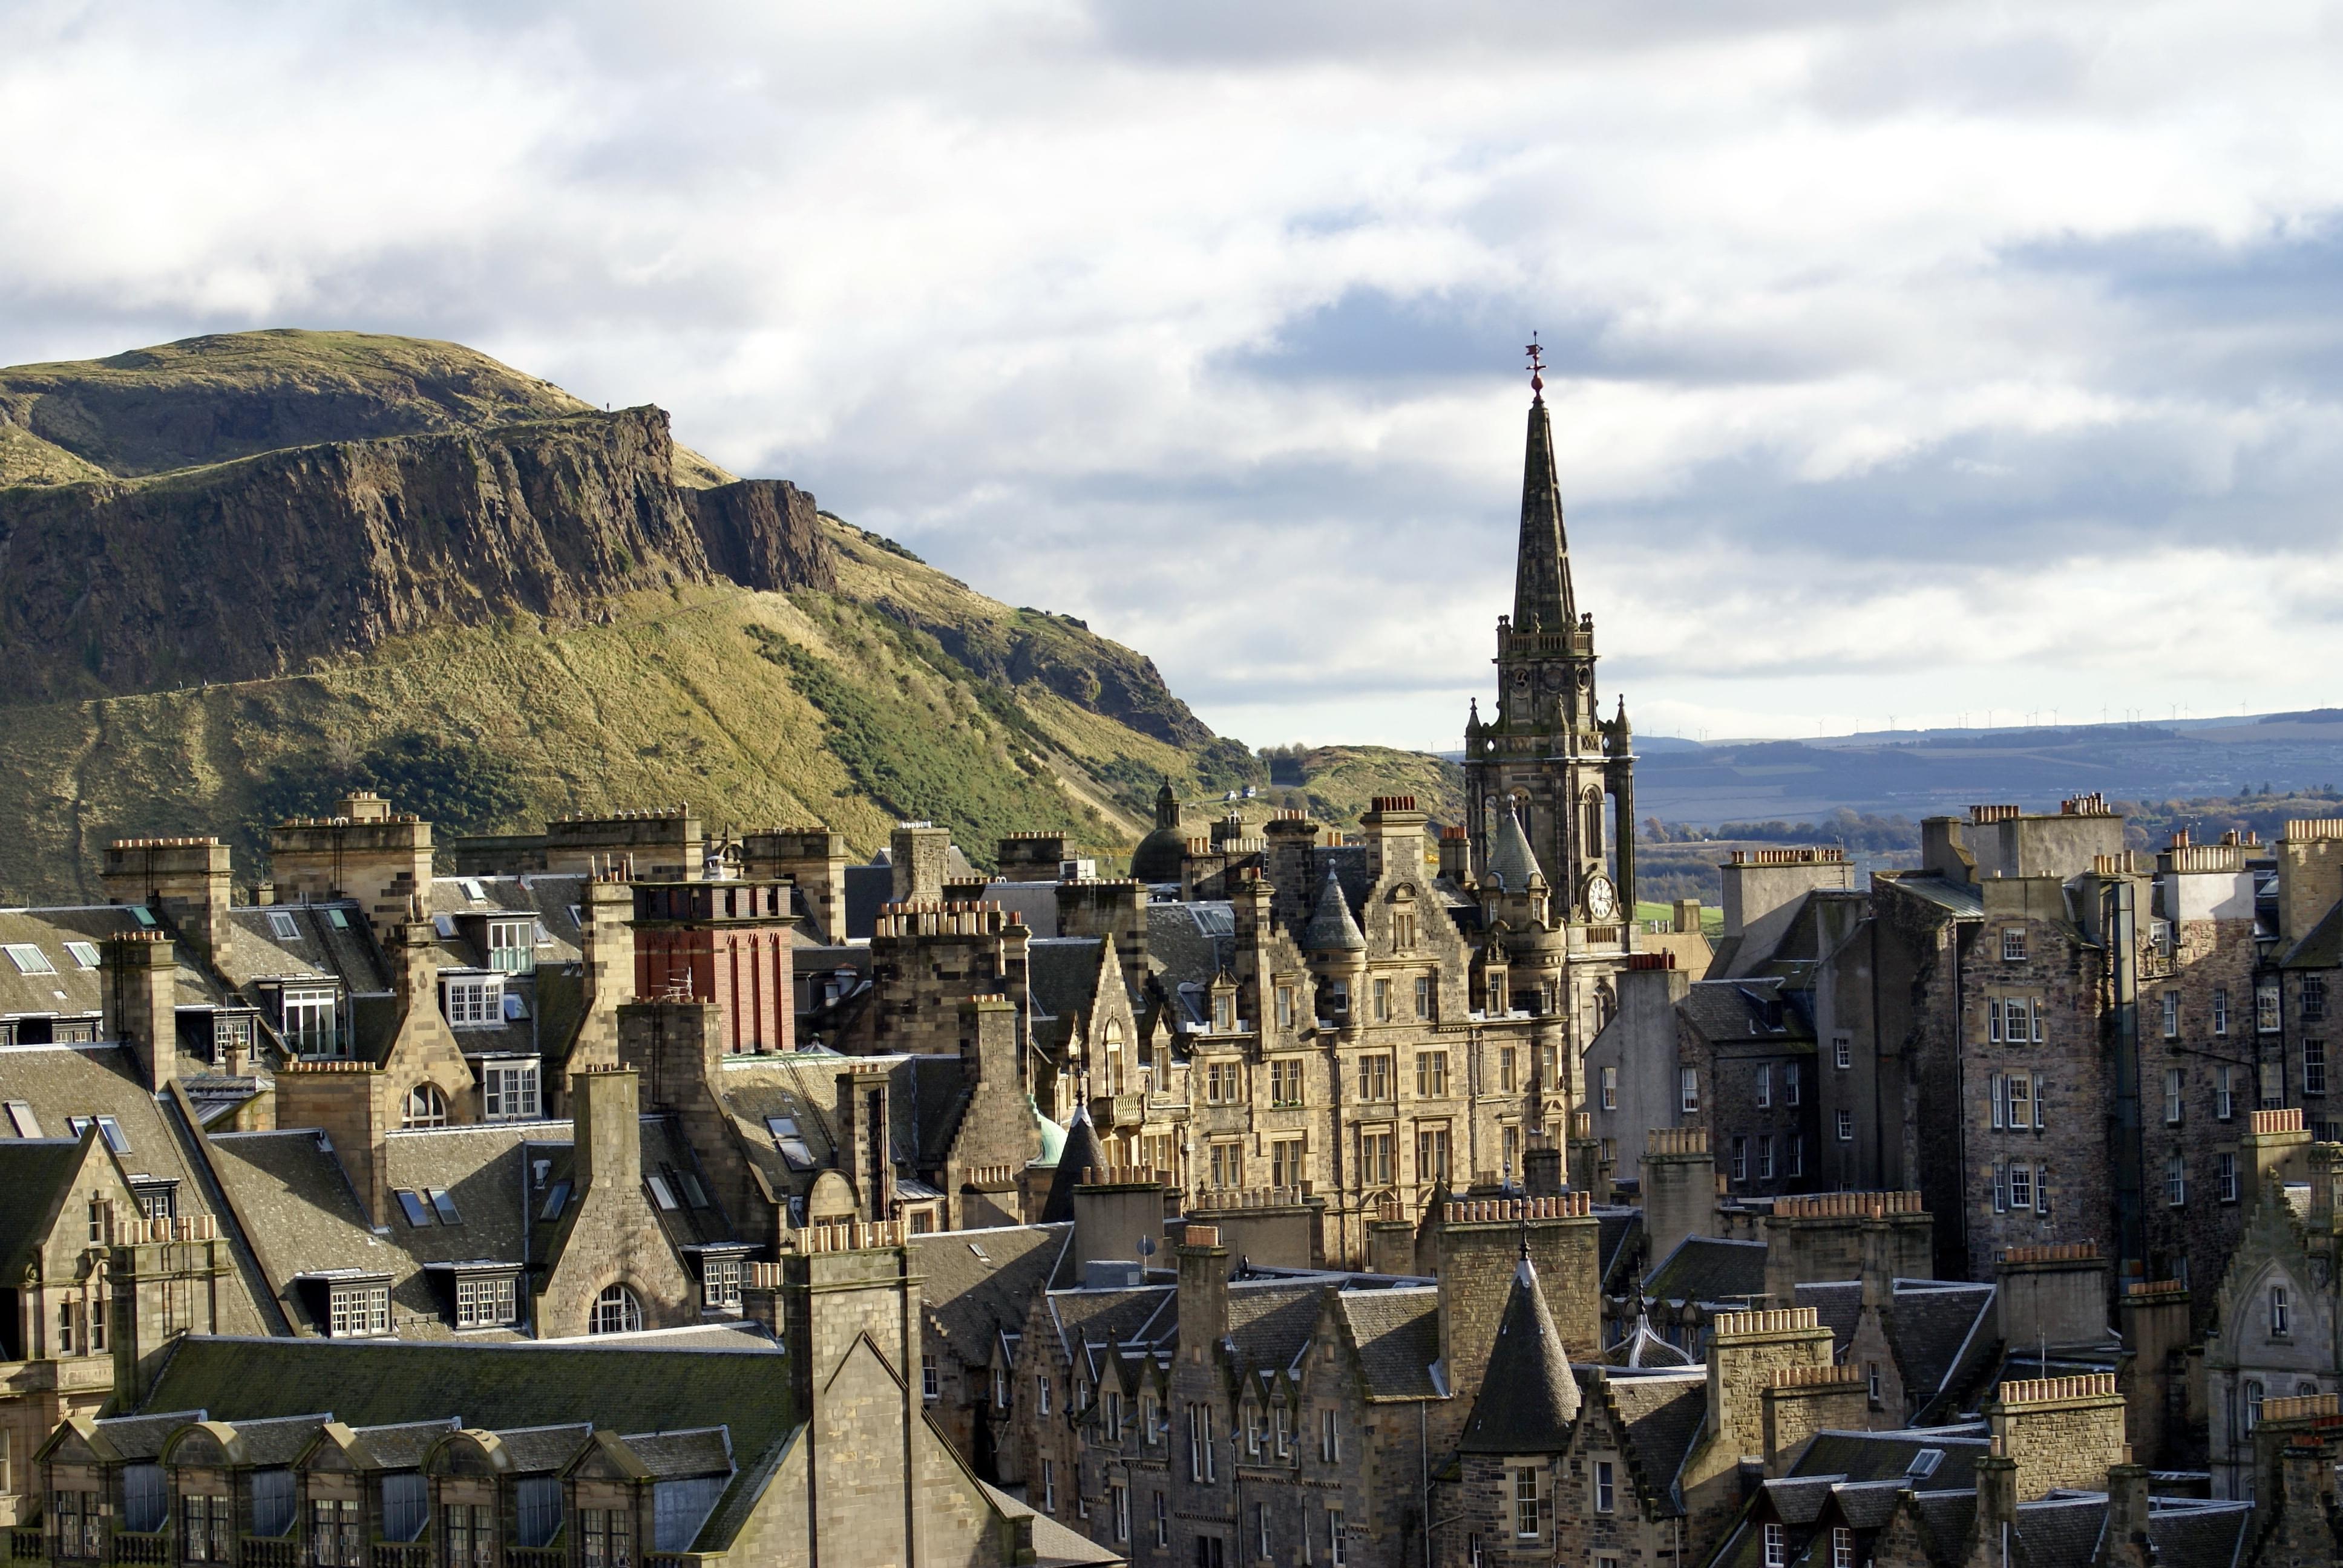 Welcome to the Old town of Edinburgh